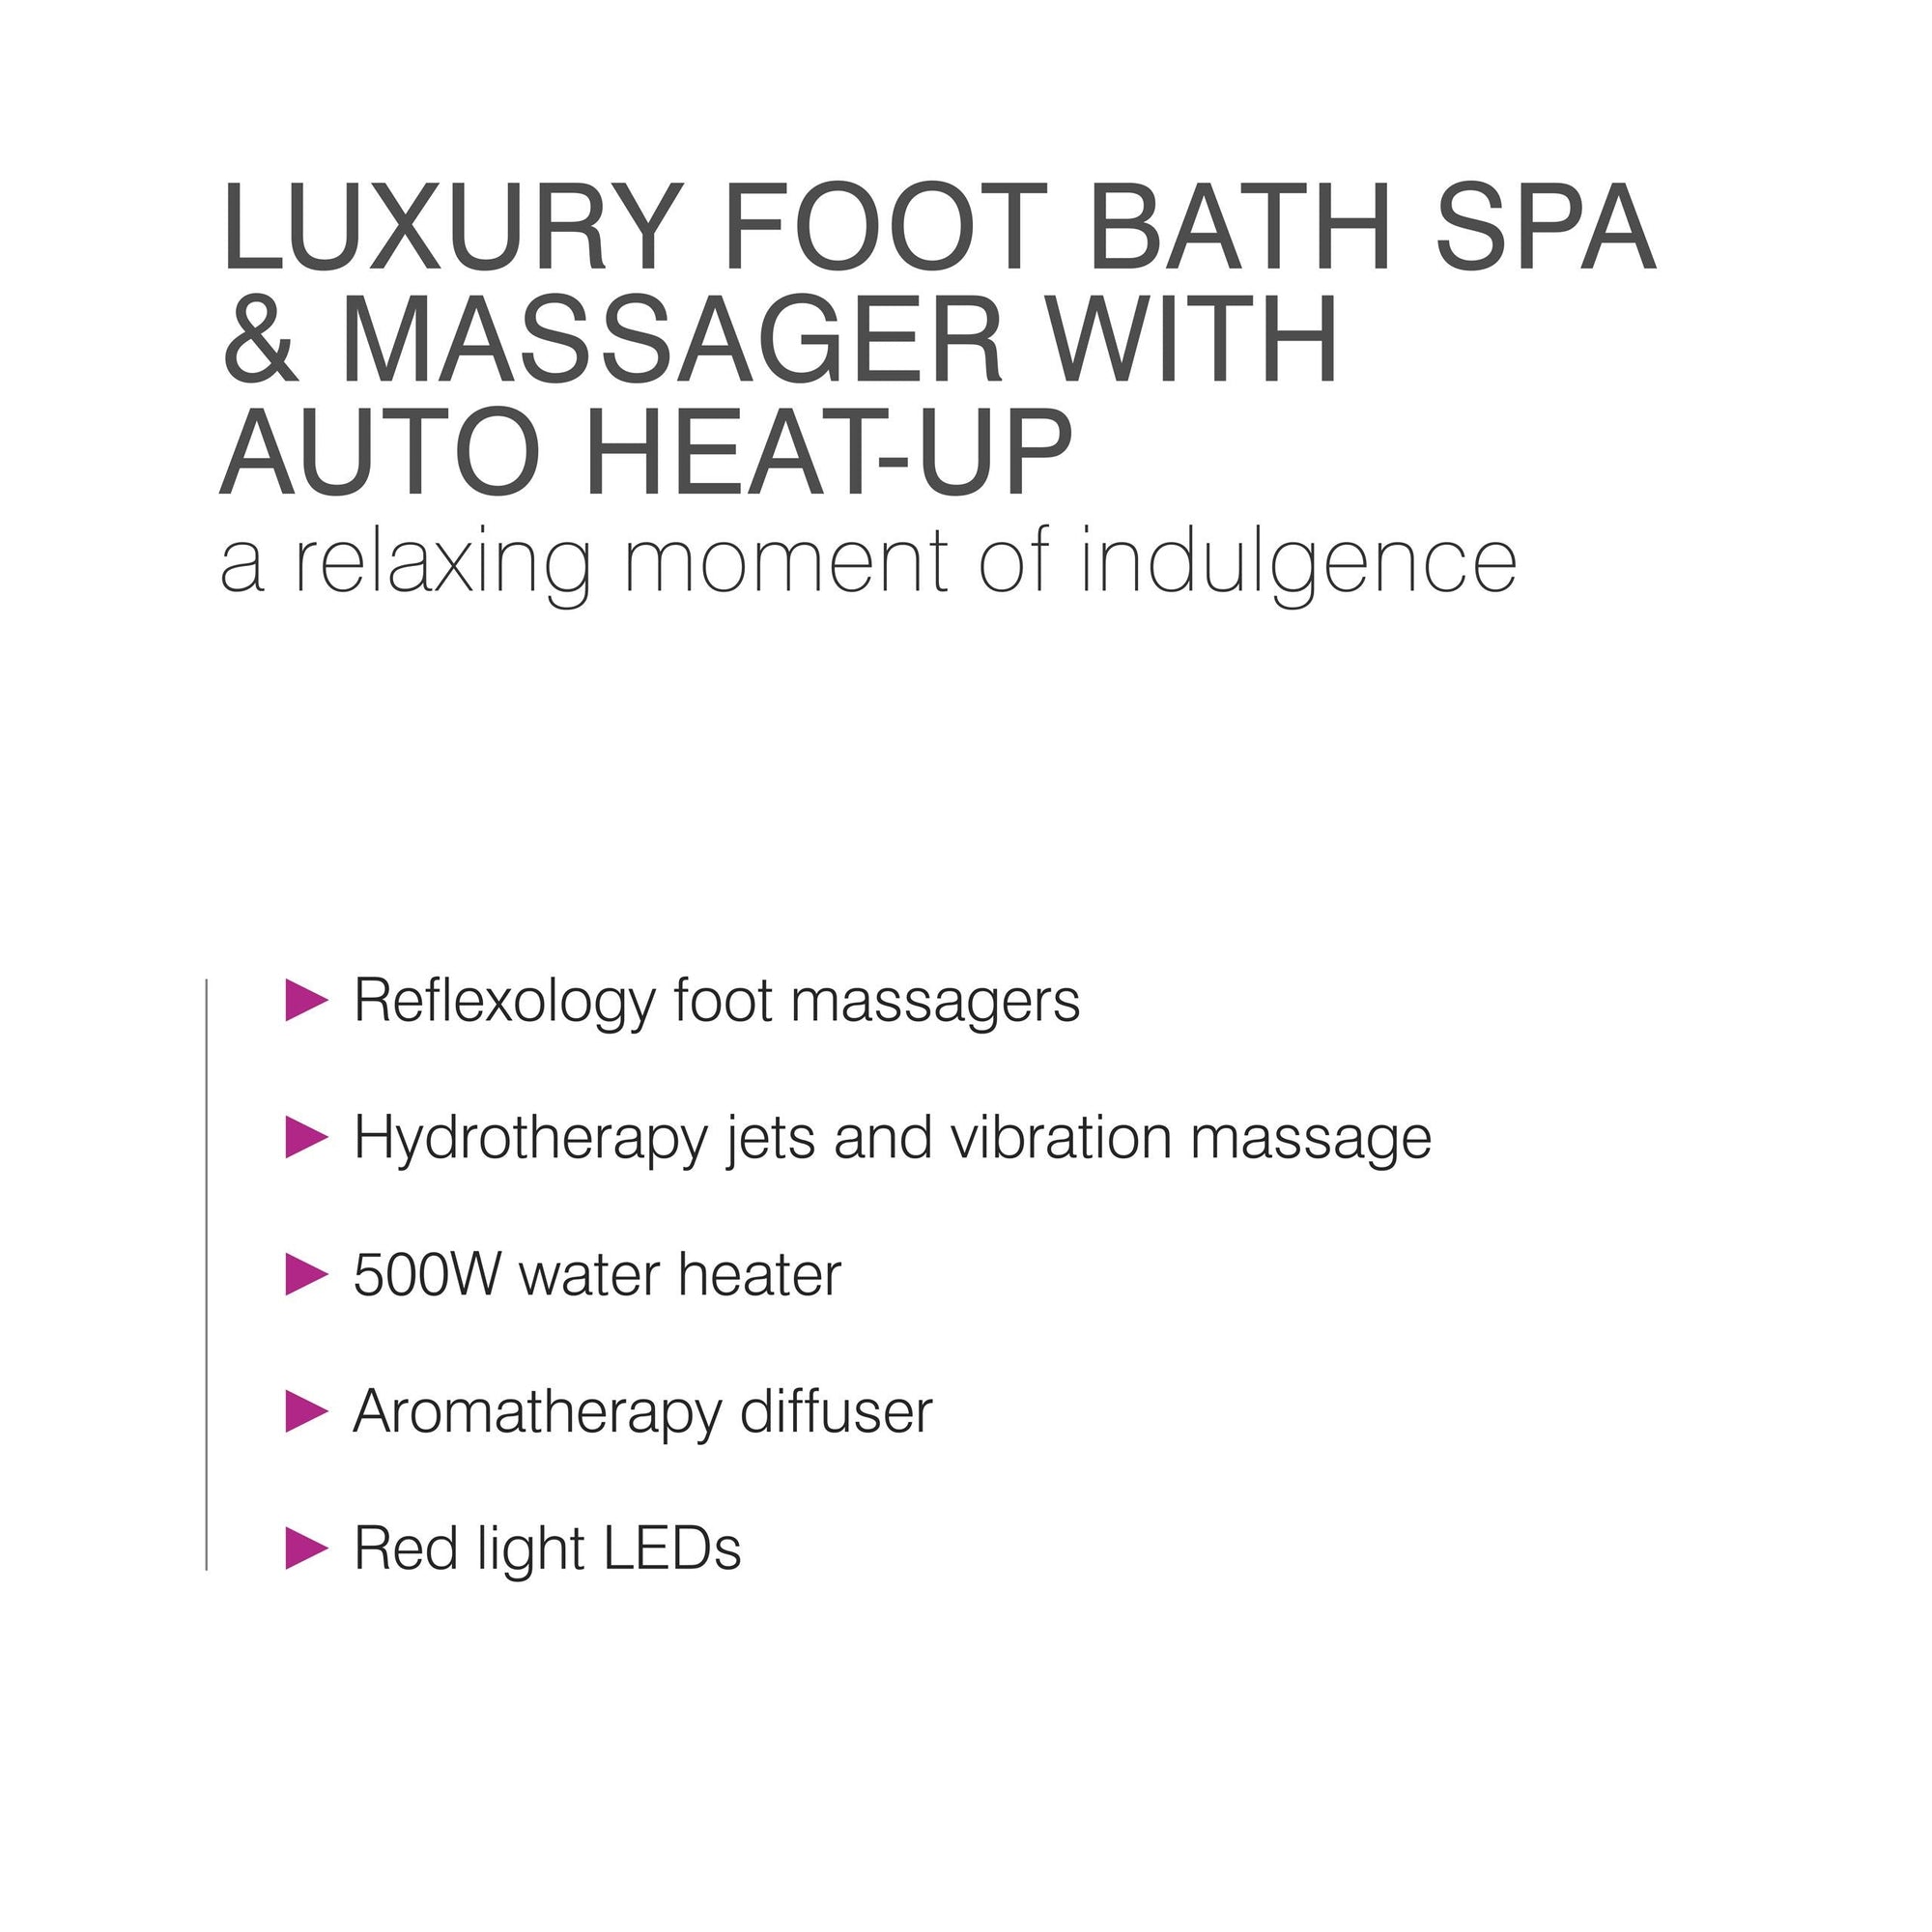 bulleted text listing features: reflexology foot massagers, hydrotherapy jets and vibration massage, 500W water heater, aromatherapy diffuser, red light LED's 